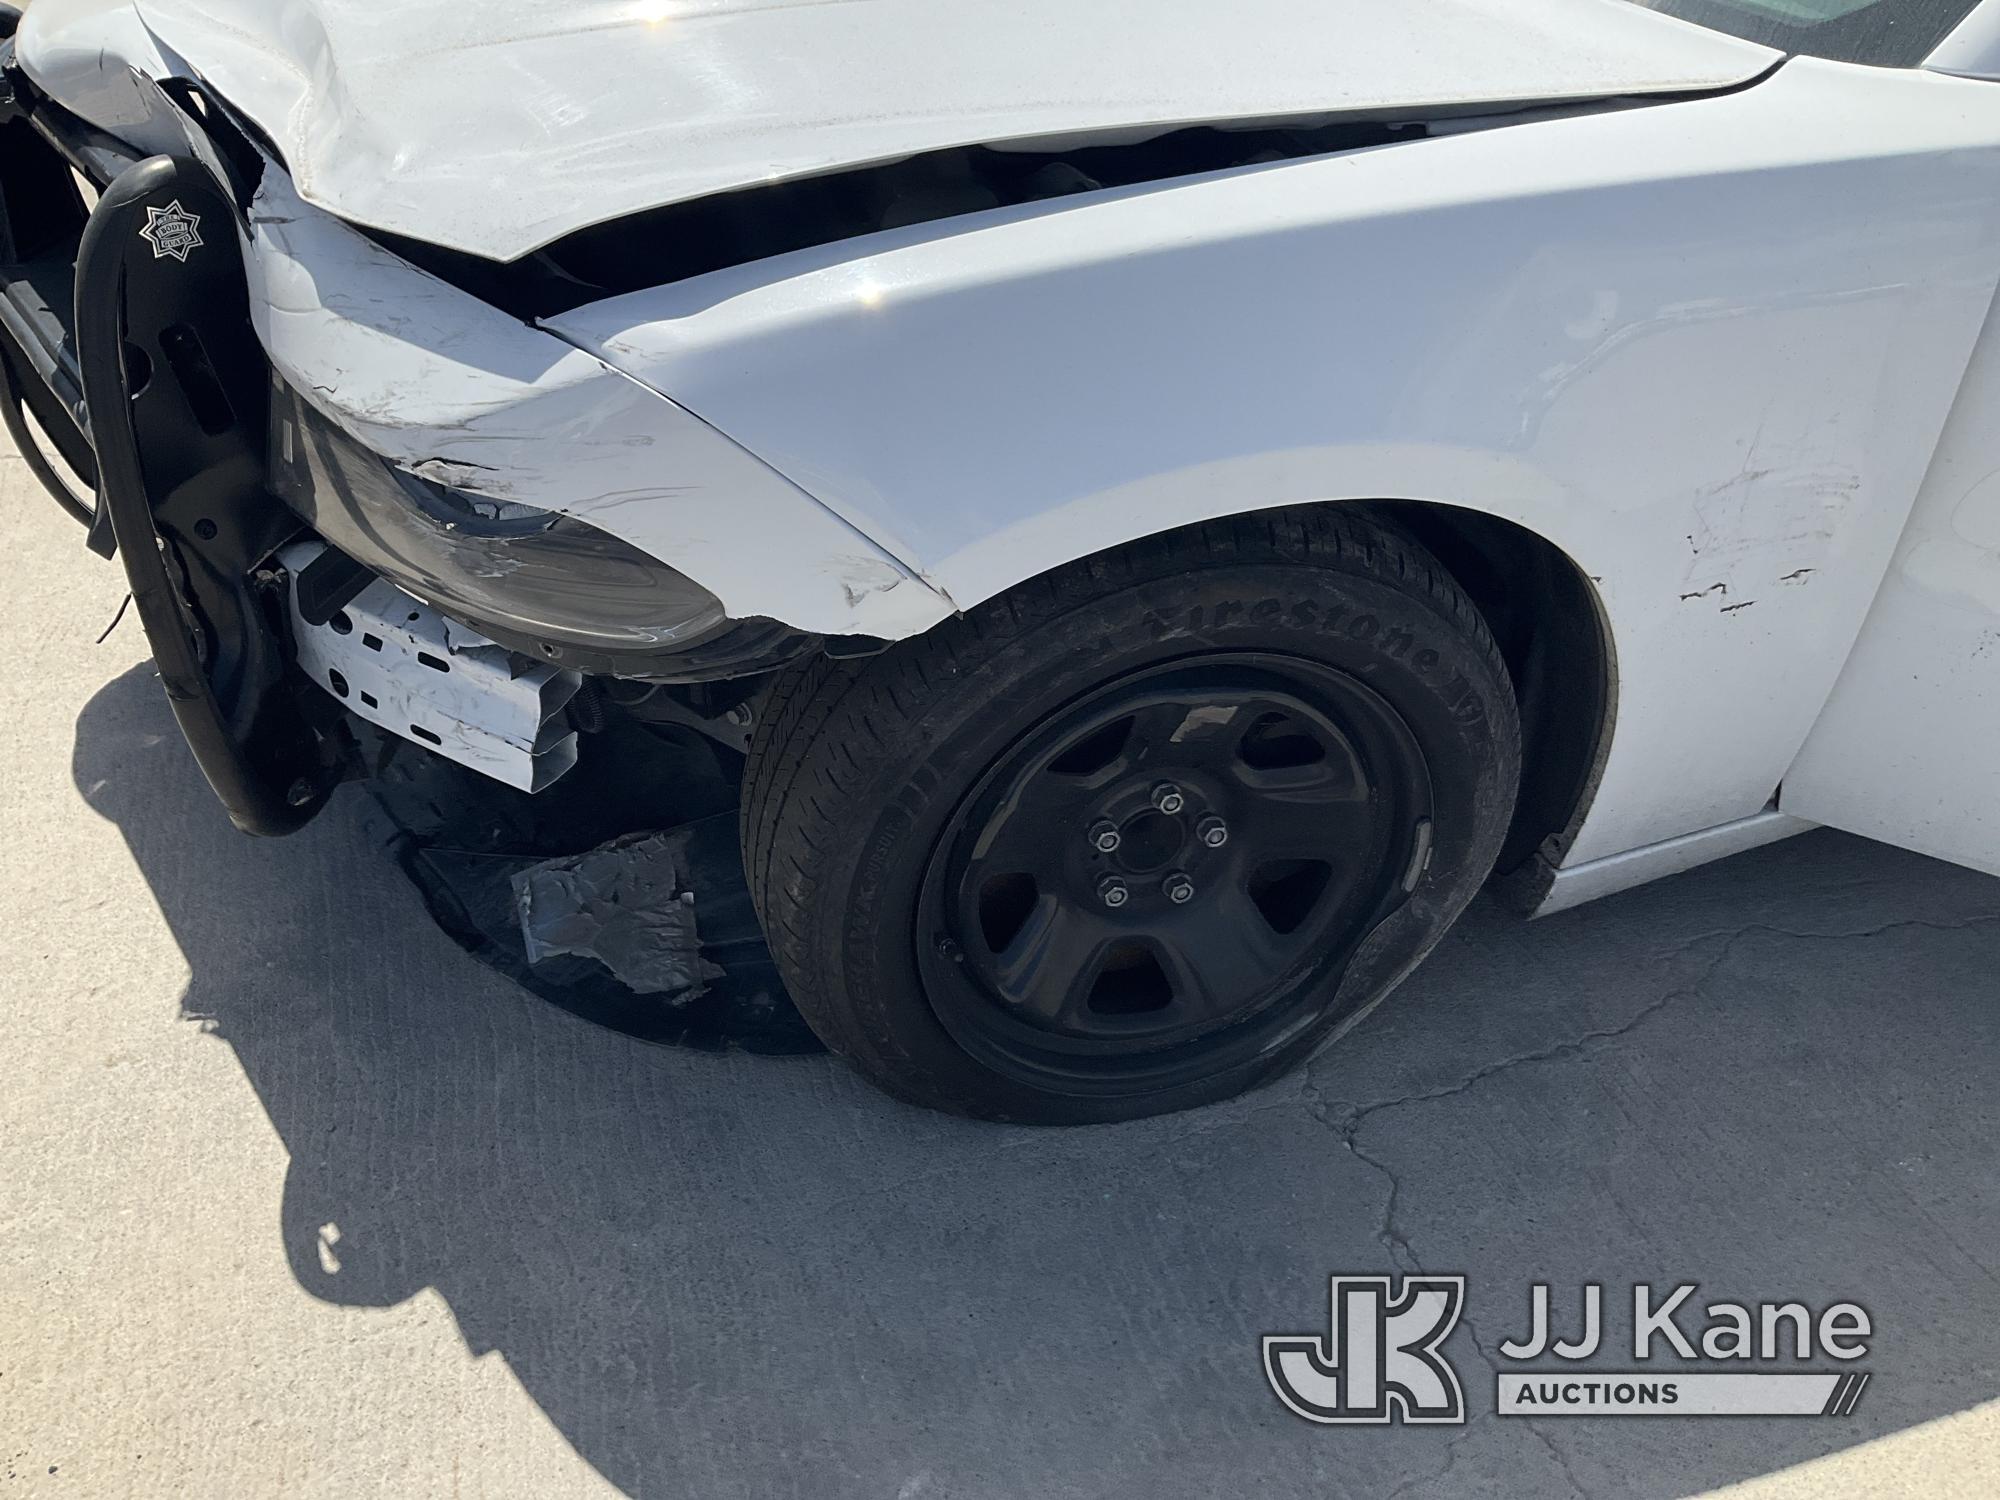 (Dixon, CA) 2019 Dodge Charger Police Package 4-Door Sedan Not Running. Wrecked) (Airbags deployed